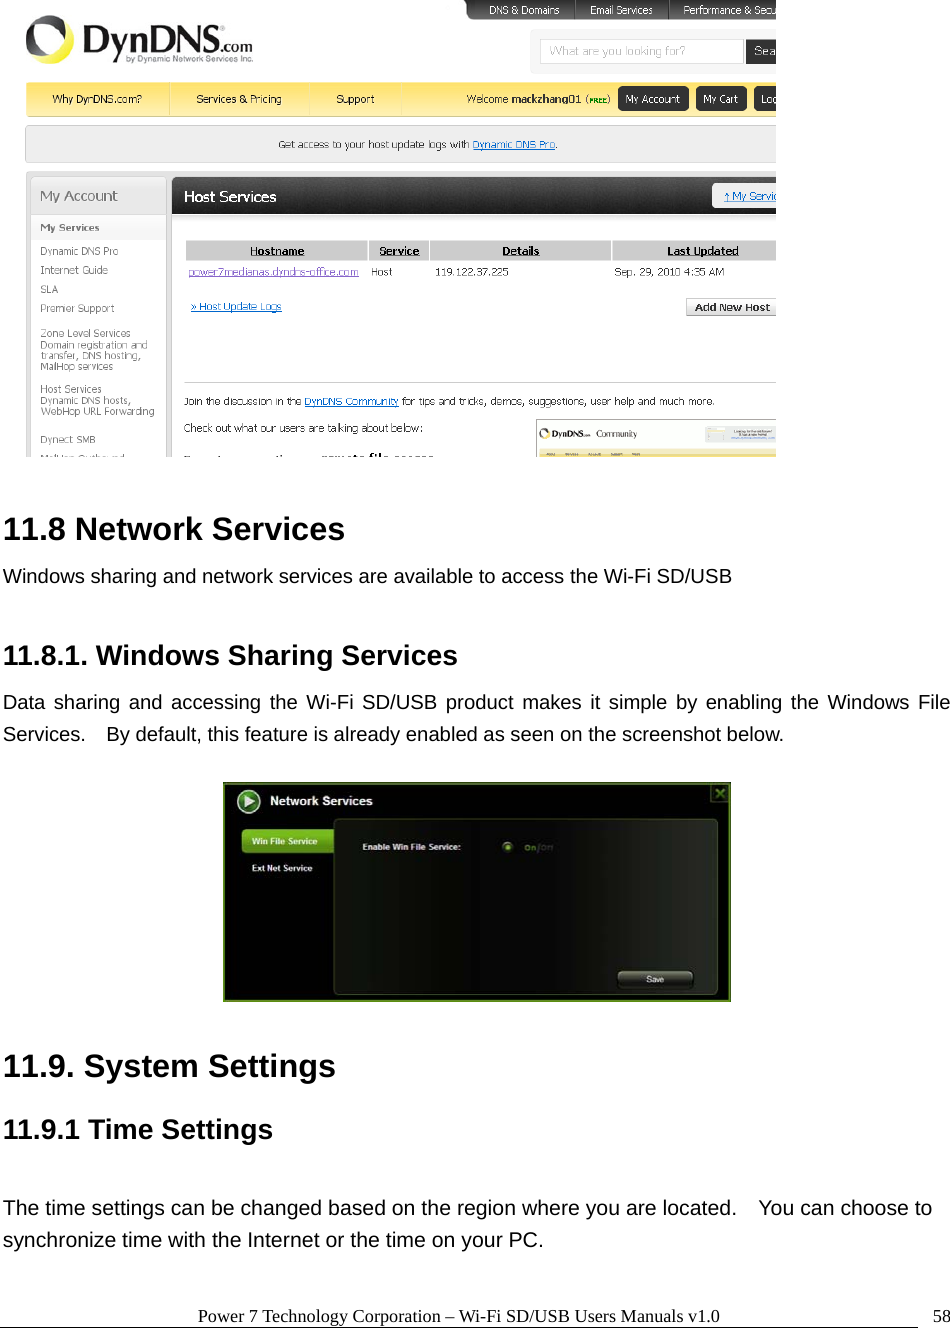 Power 7 Technology Corporation – Wi-Fi SD/USB Users Manuals v1.0  58  11.8 Network Services Windows sharing and network services are available to access the Wi-Fi SD/USB  11.8.1. Windows Sharing Services Data sharing and accessing the Wi-Fi SD/USB product makes it simple by enabling the Windows File Services.    By default, this feature is already enabled as seen on the screenshot below.    11.9. System Settings 11.9.1 Time Settings  The time settings can be changed based on the region where you are located.    You can choose to synchronize time with the Internet or the time on your PC.    